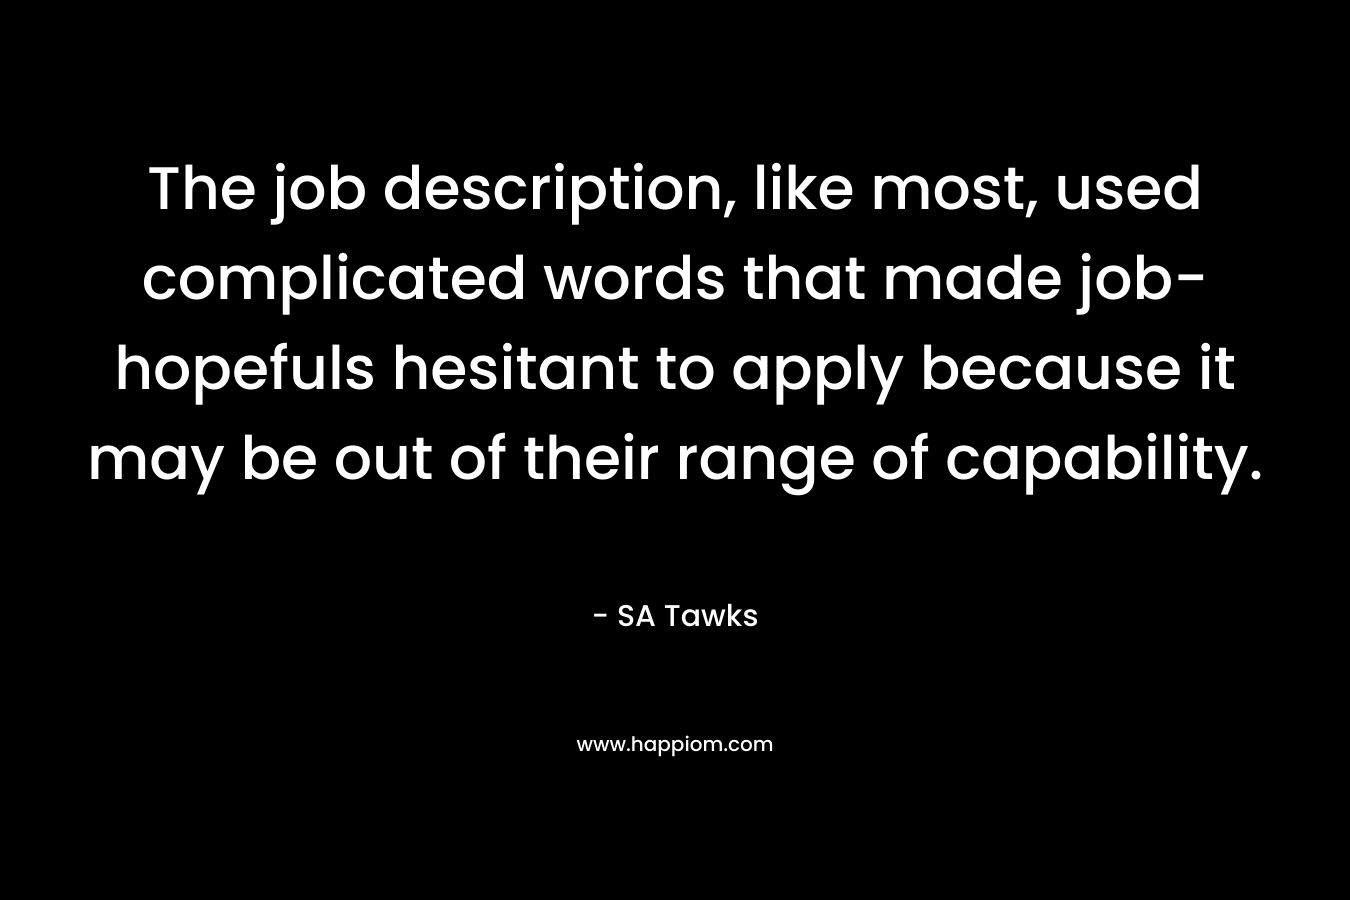 The job description, like most, used complicated words that made job-hopefuls hesitant to apply because it may be out of their range of capability.